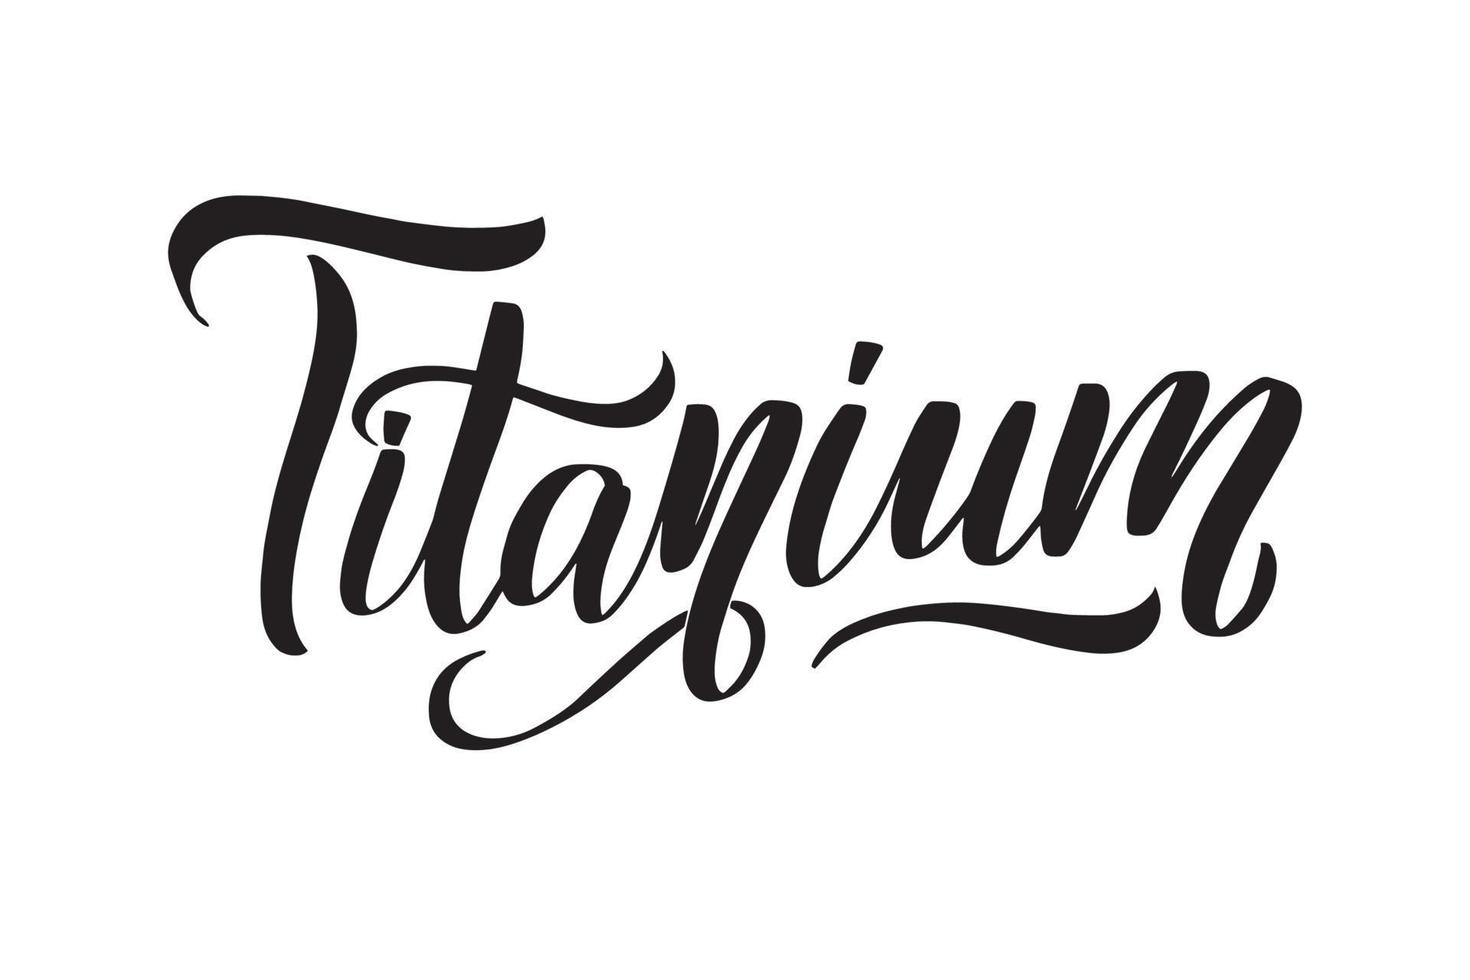 Titanium. Inspirational handwritten brush lettering. Vector calligraphy stock illustration isolated on white background. Typography for banners, badges, postcard, tshirt, prints.